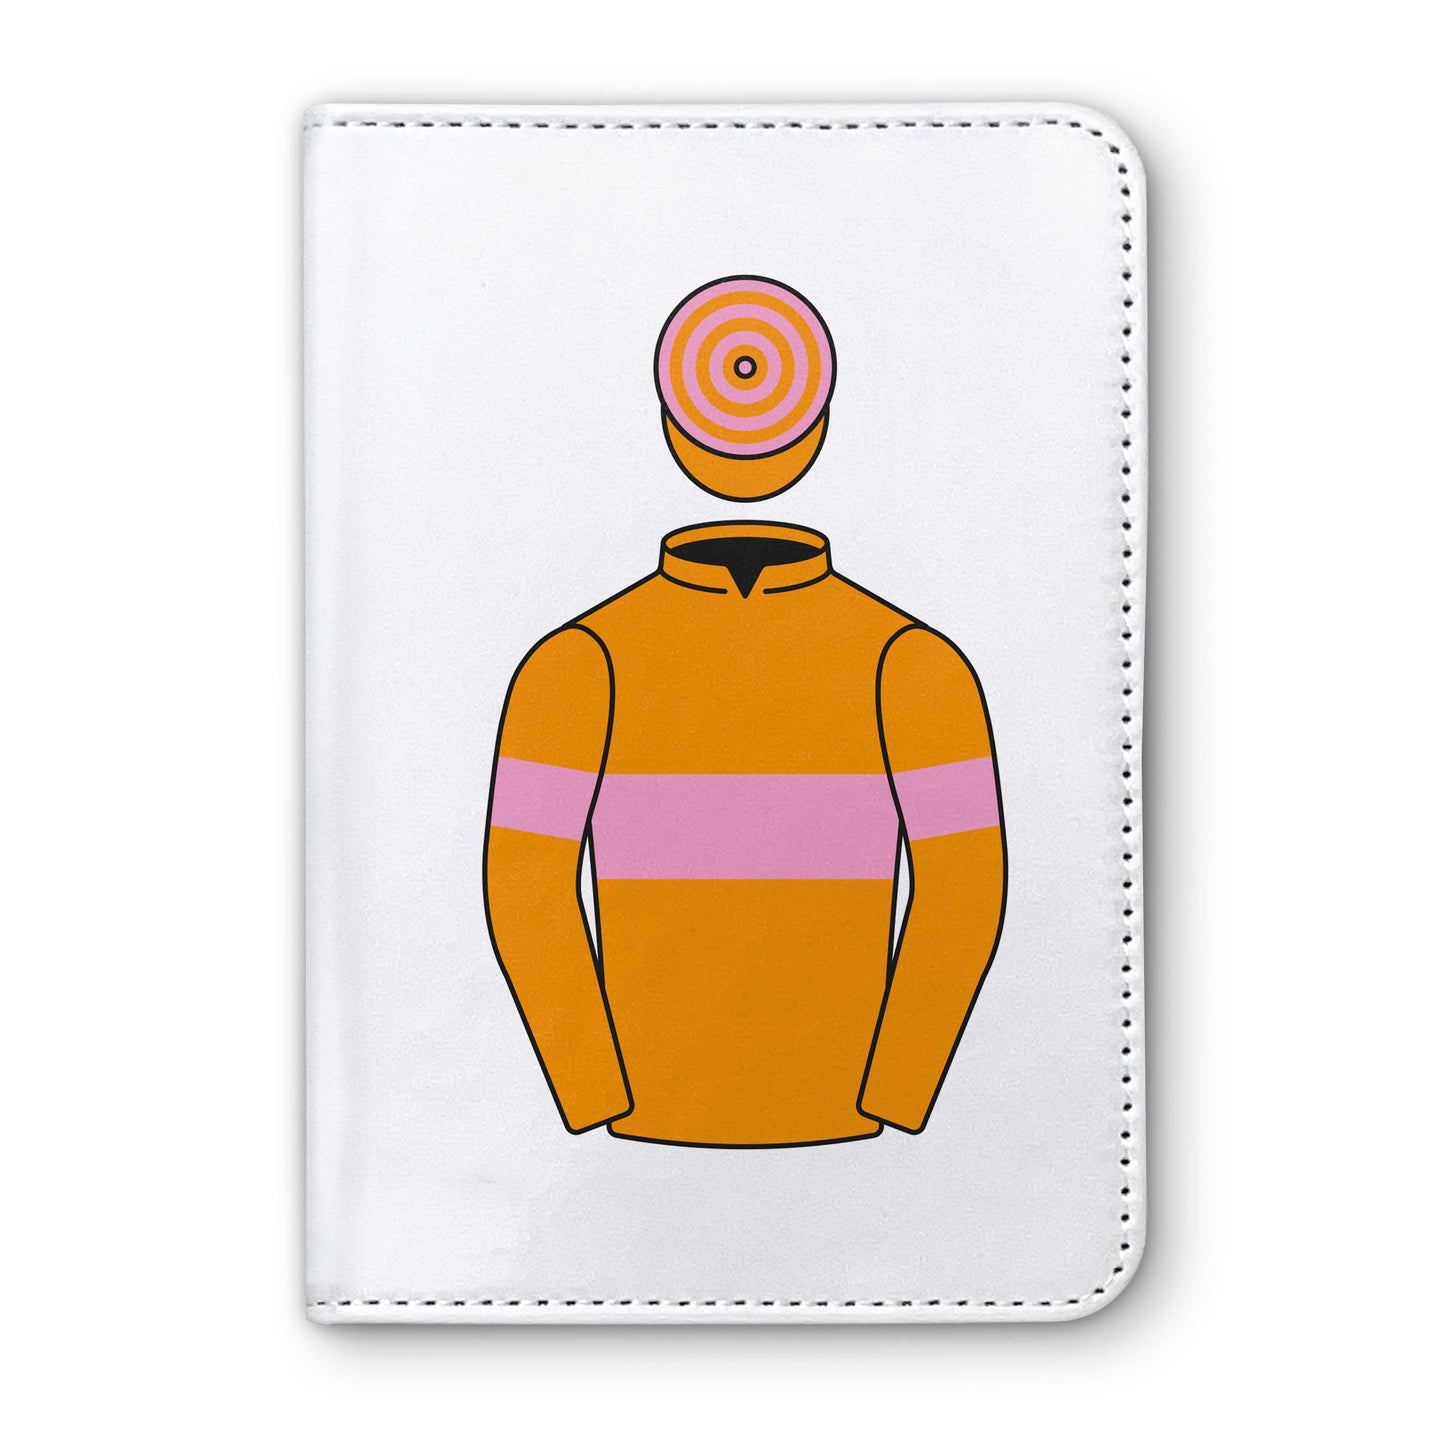 Mrs Mary-Ann MiddletonHorse Racing Passport Holder - Hacked Up Horse Racing Gifts